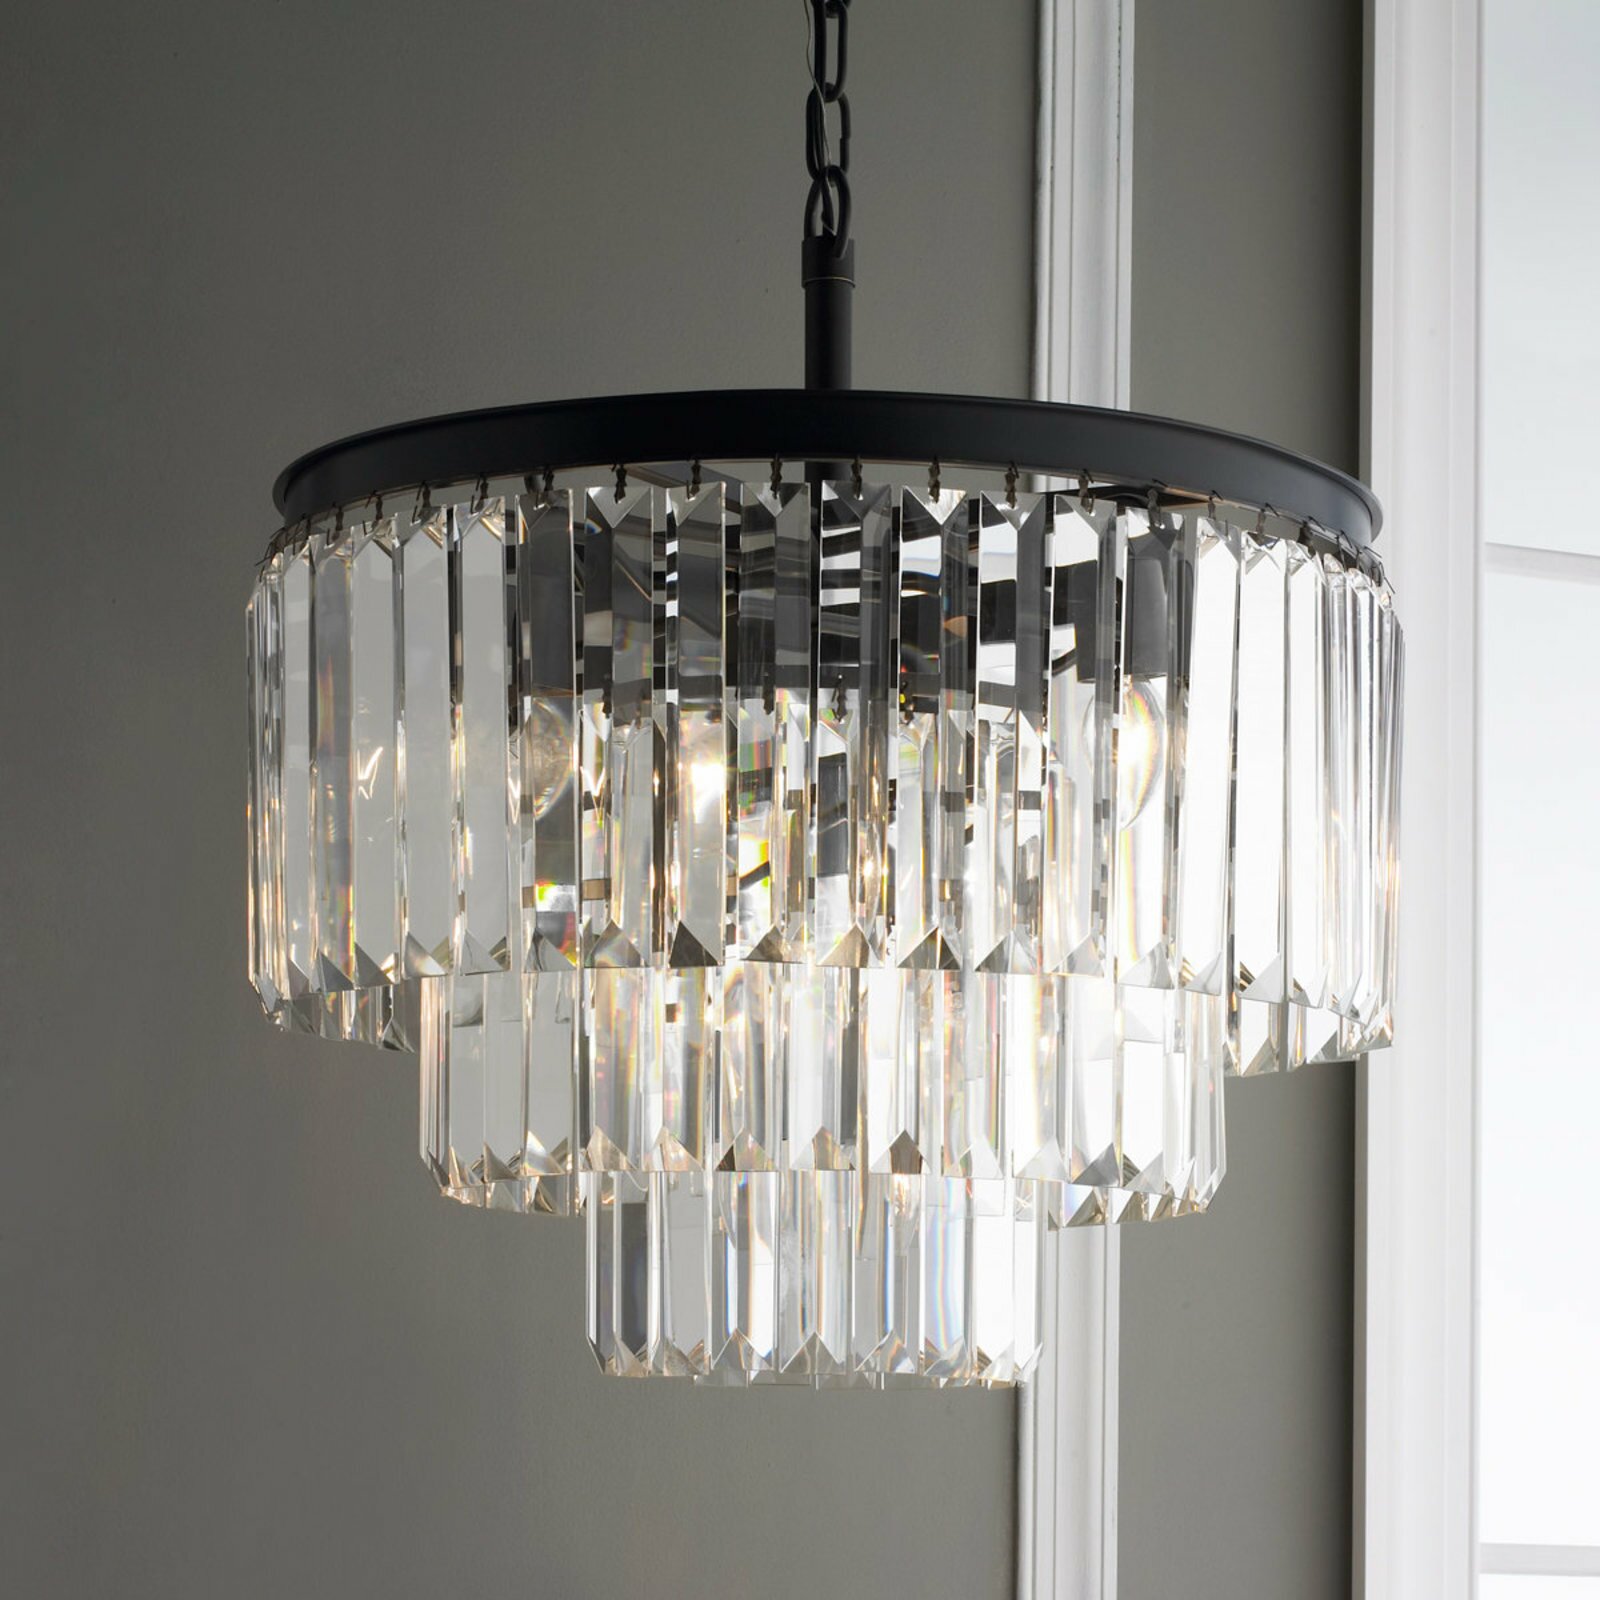 Chandelier Replacement Globes | Glass Globes for Chandeliers | Glass Chandelier Shades